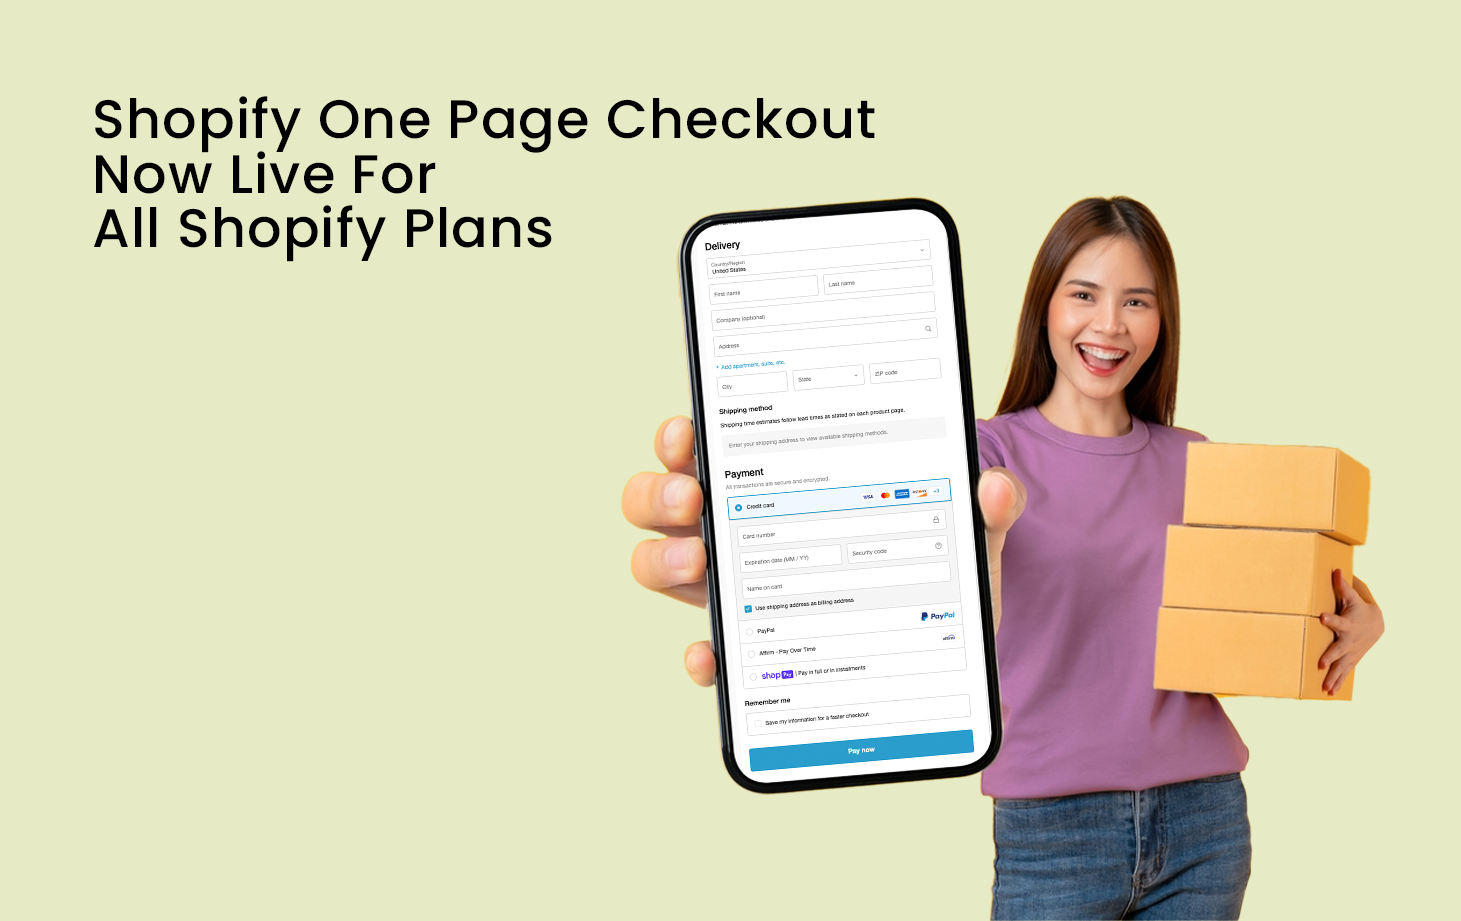 Shopify One Page Checkout Now Live For All Shopify Plans